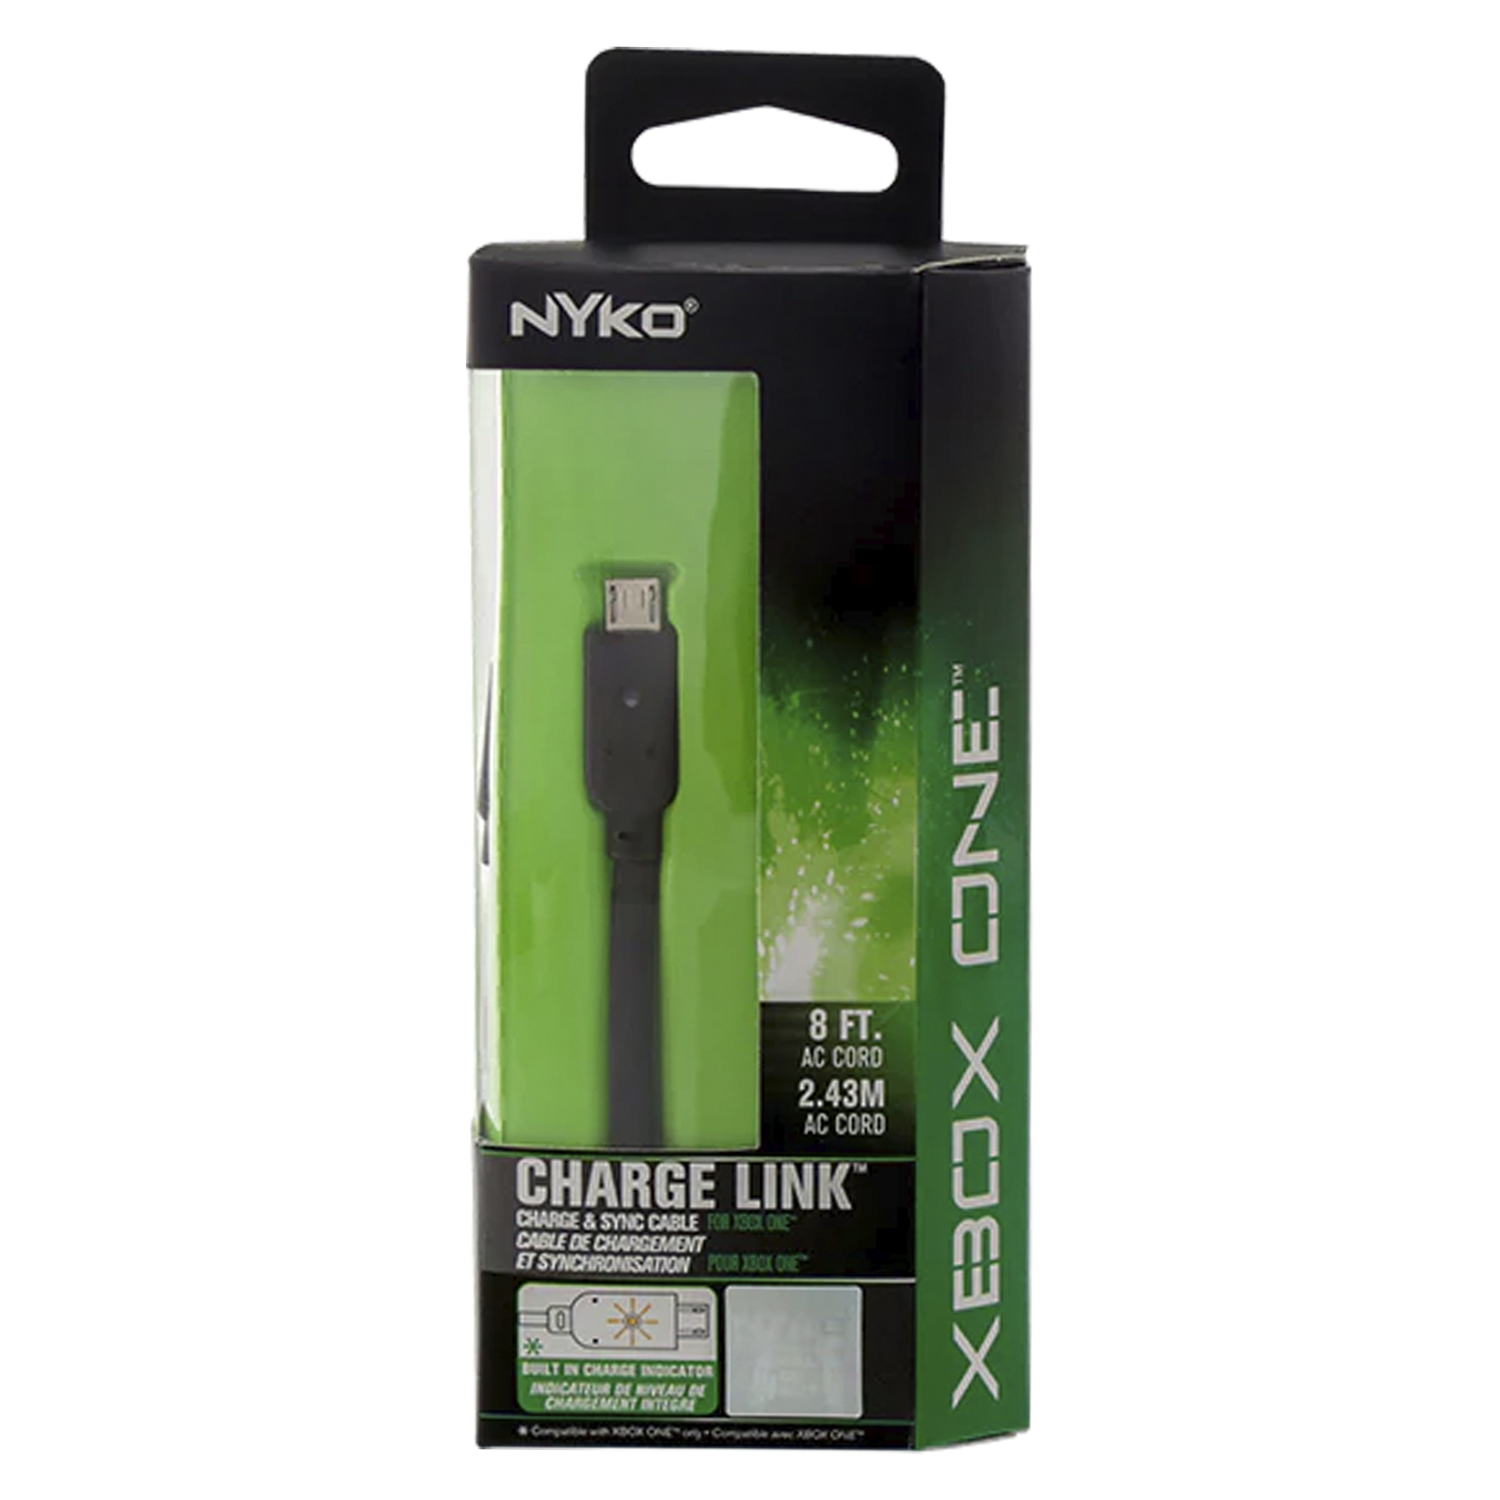 Cabo Charge Link Nyko para Xbox One (COD:86115)